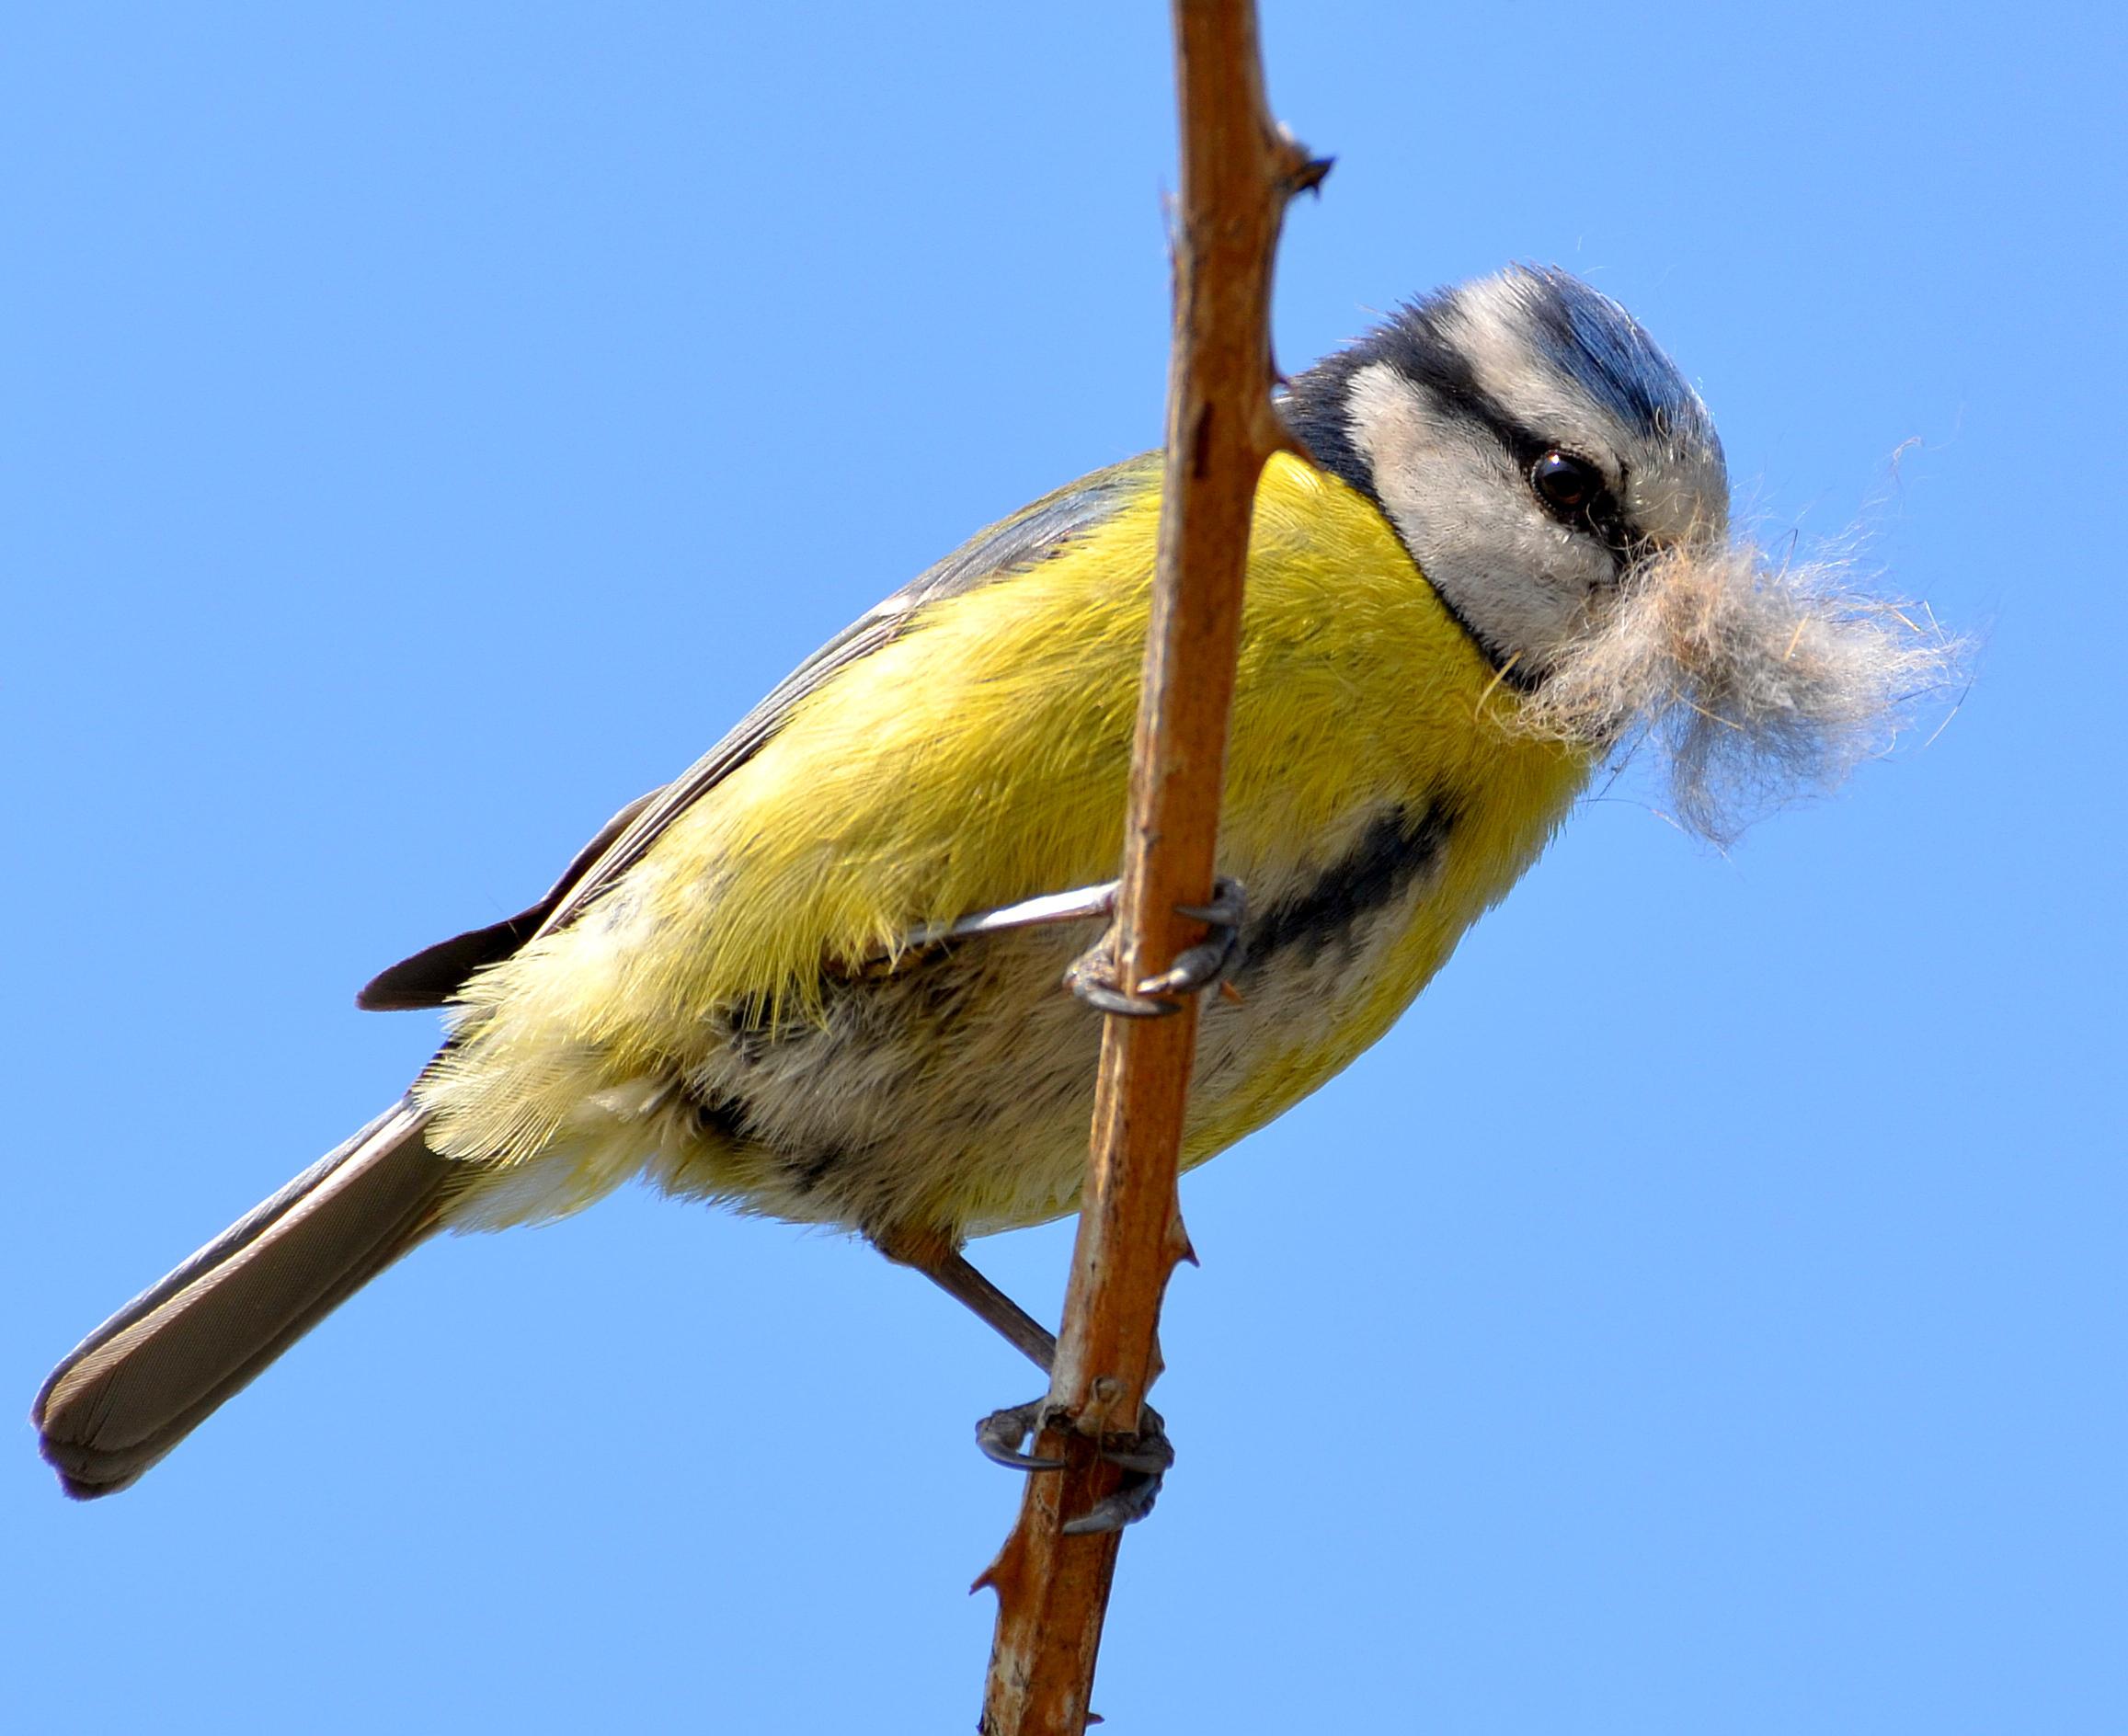 A blue tit with nesting material